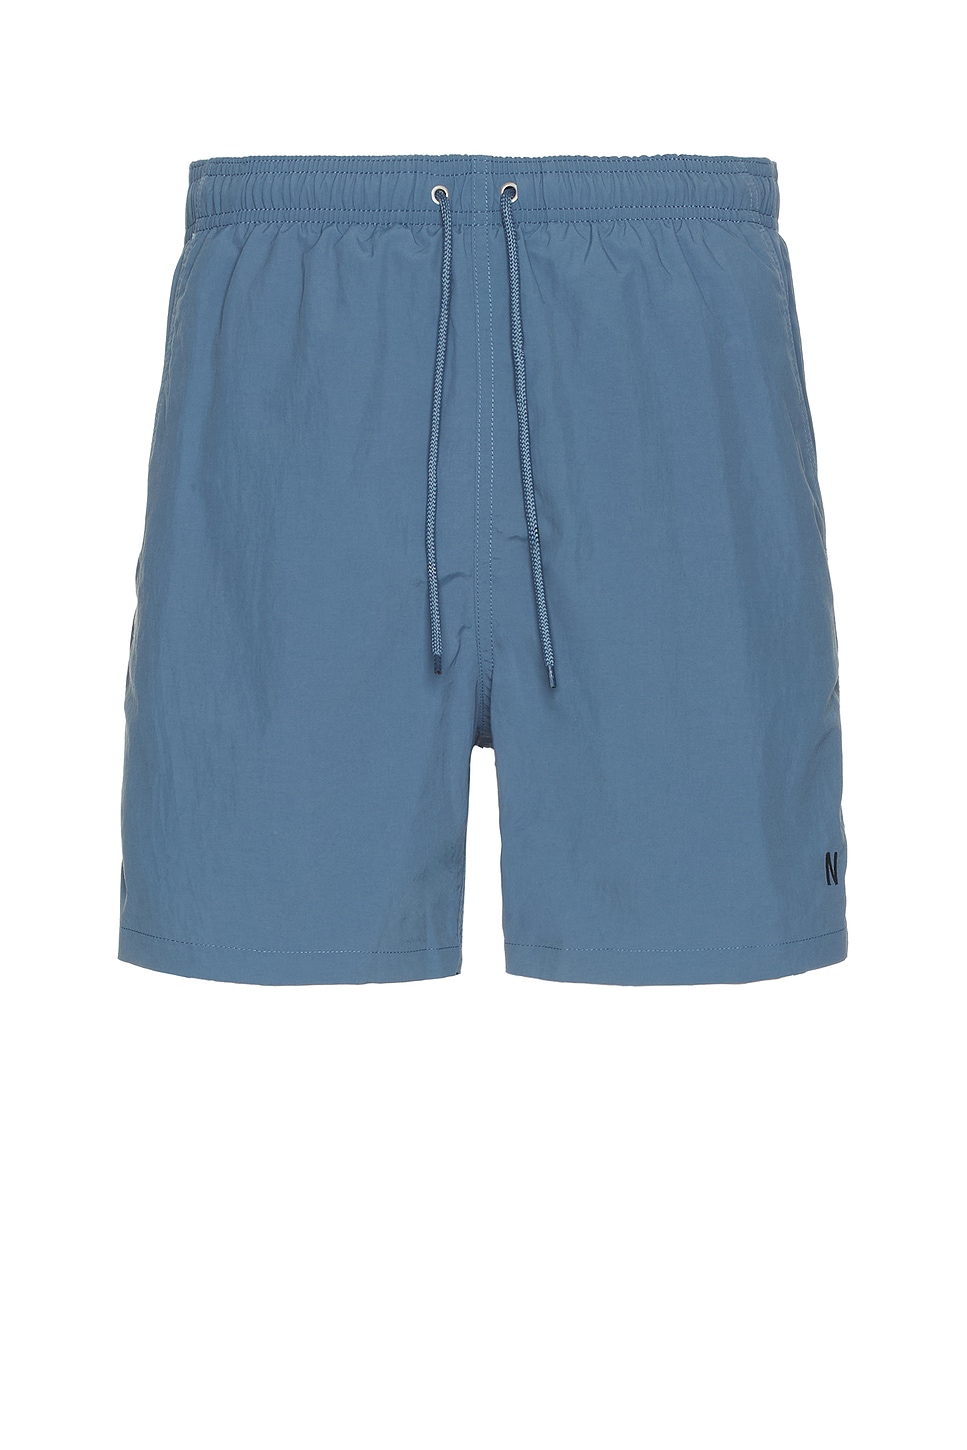 Image 1 of Norse Projects Hauge Recycled Nylon Swimmers Short in Fog Blue